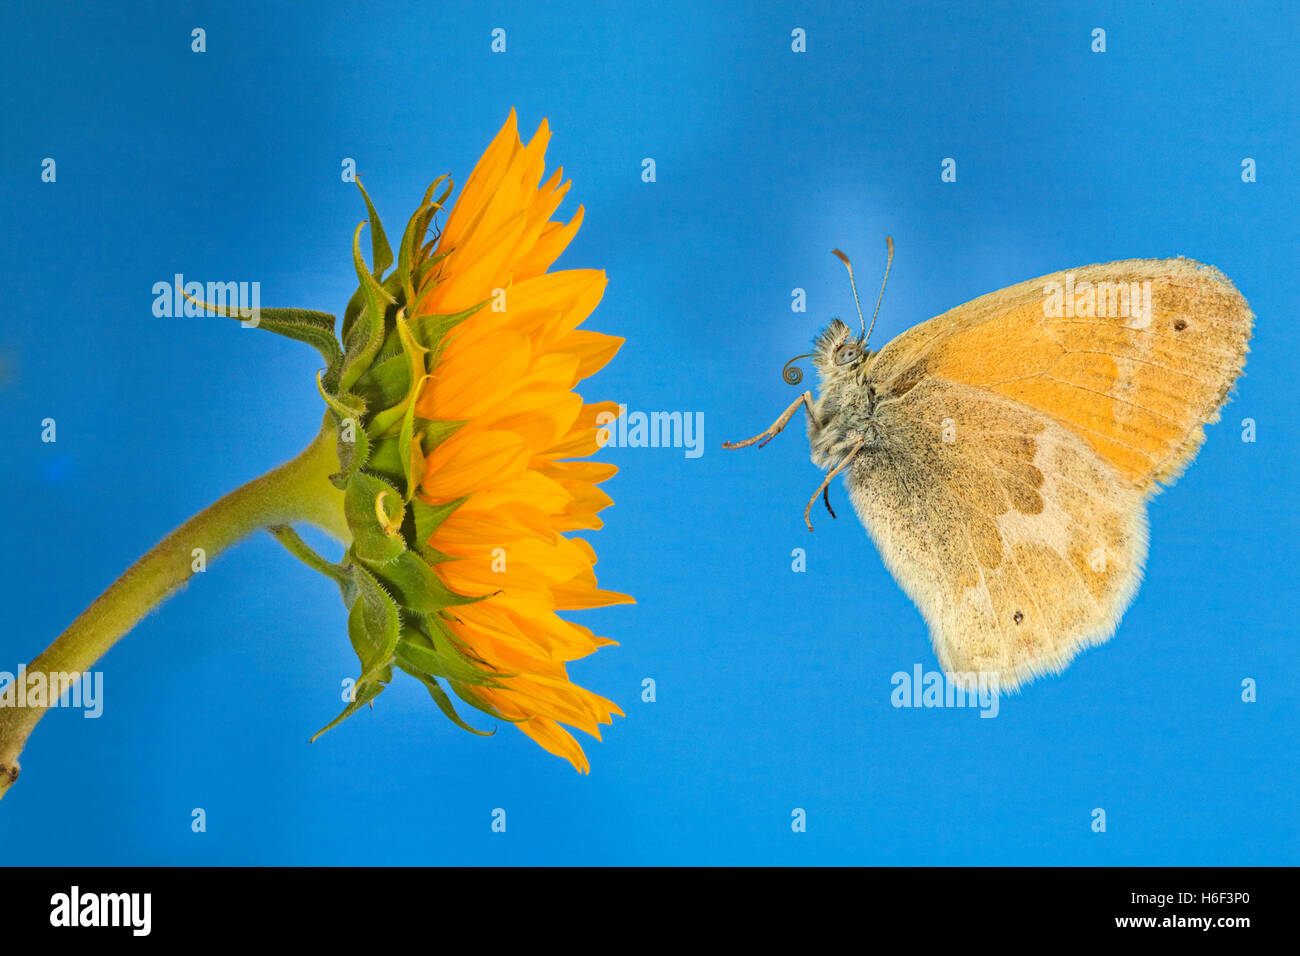 A dainty sulphur butterfly, Nathalis iole, also known as a dwarf yellow butterfly on a thistle Stock Photo